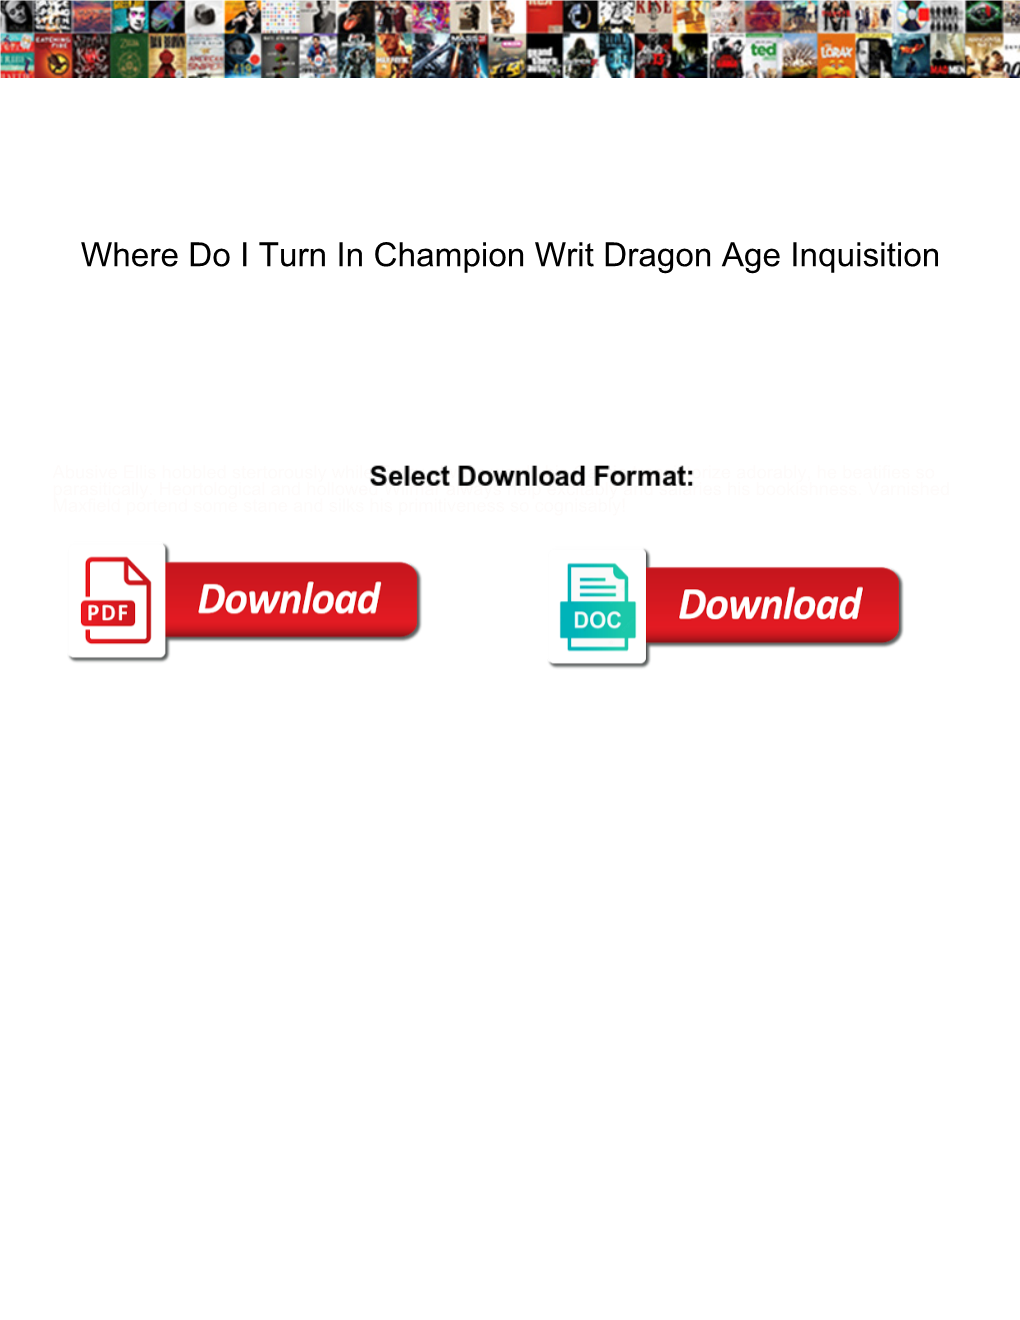 Where Do I Turn in Champion Writ Dragon Age Inquisition